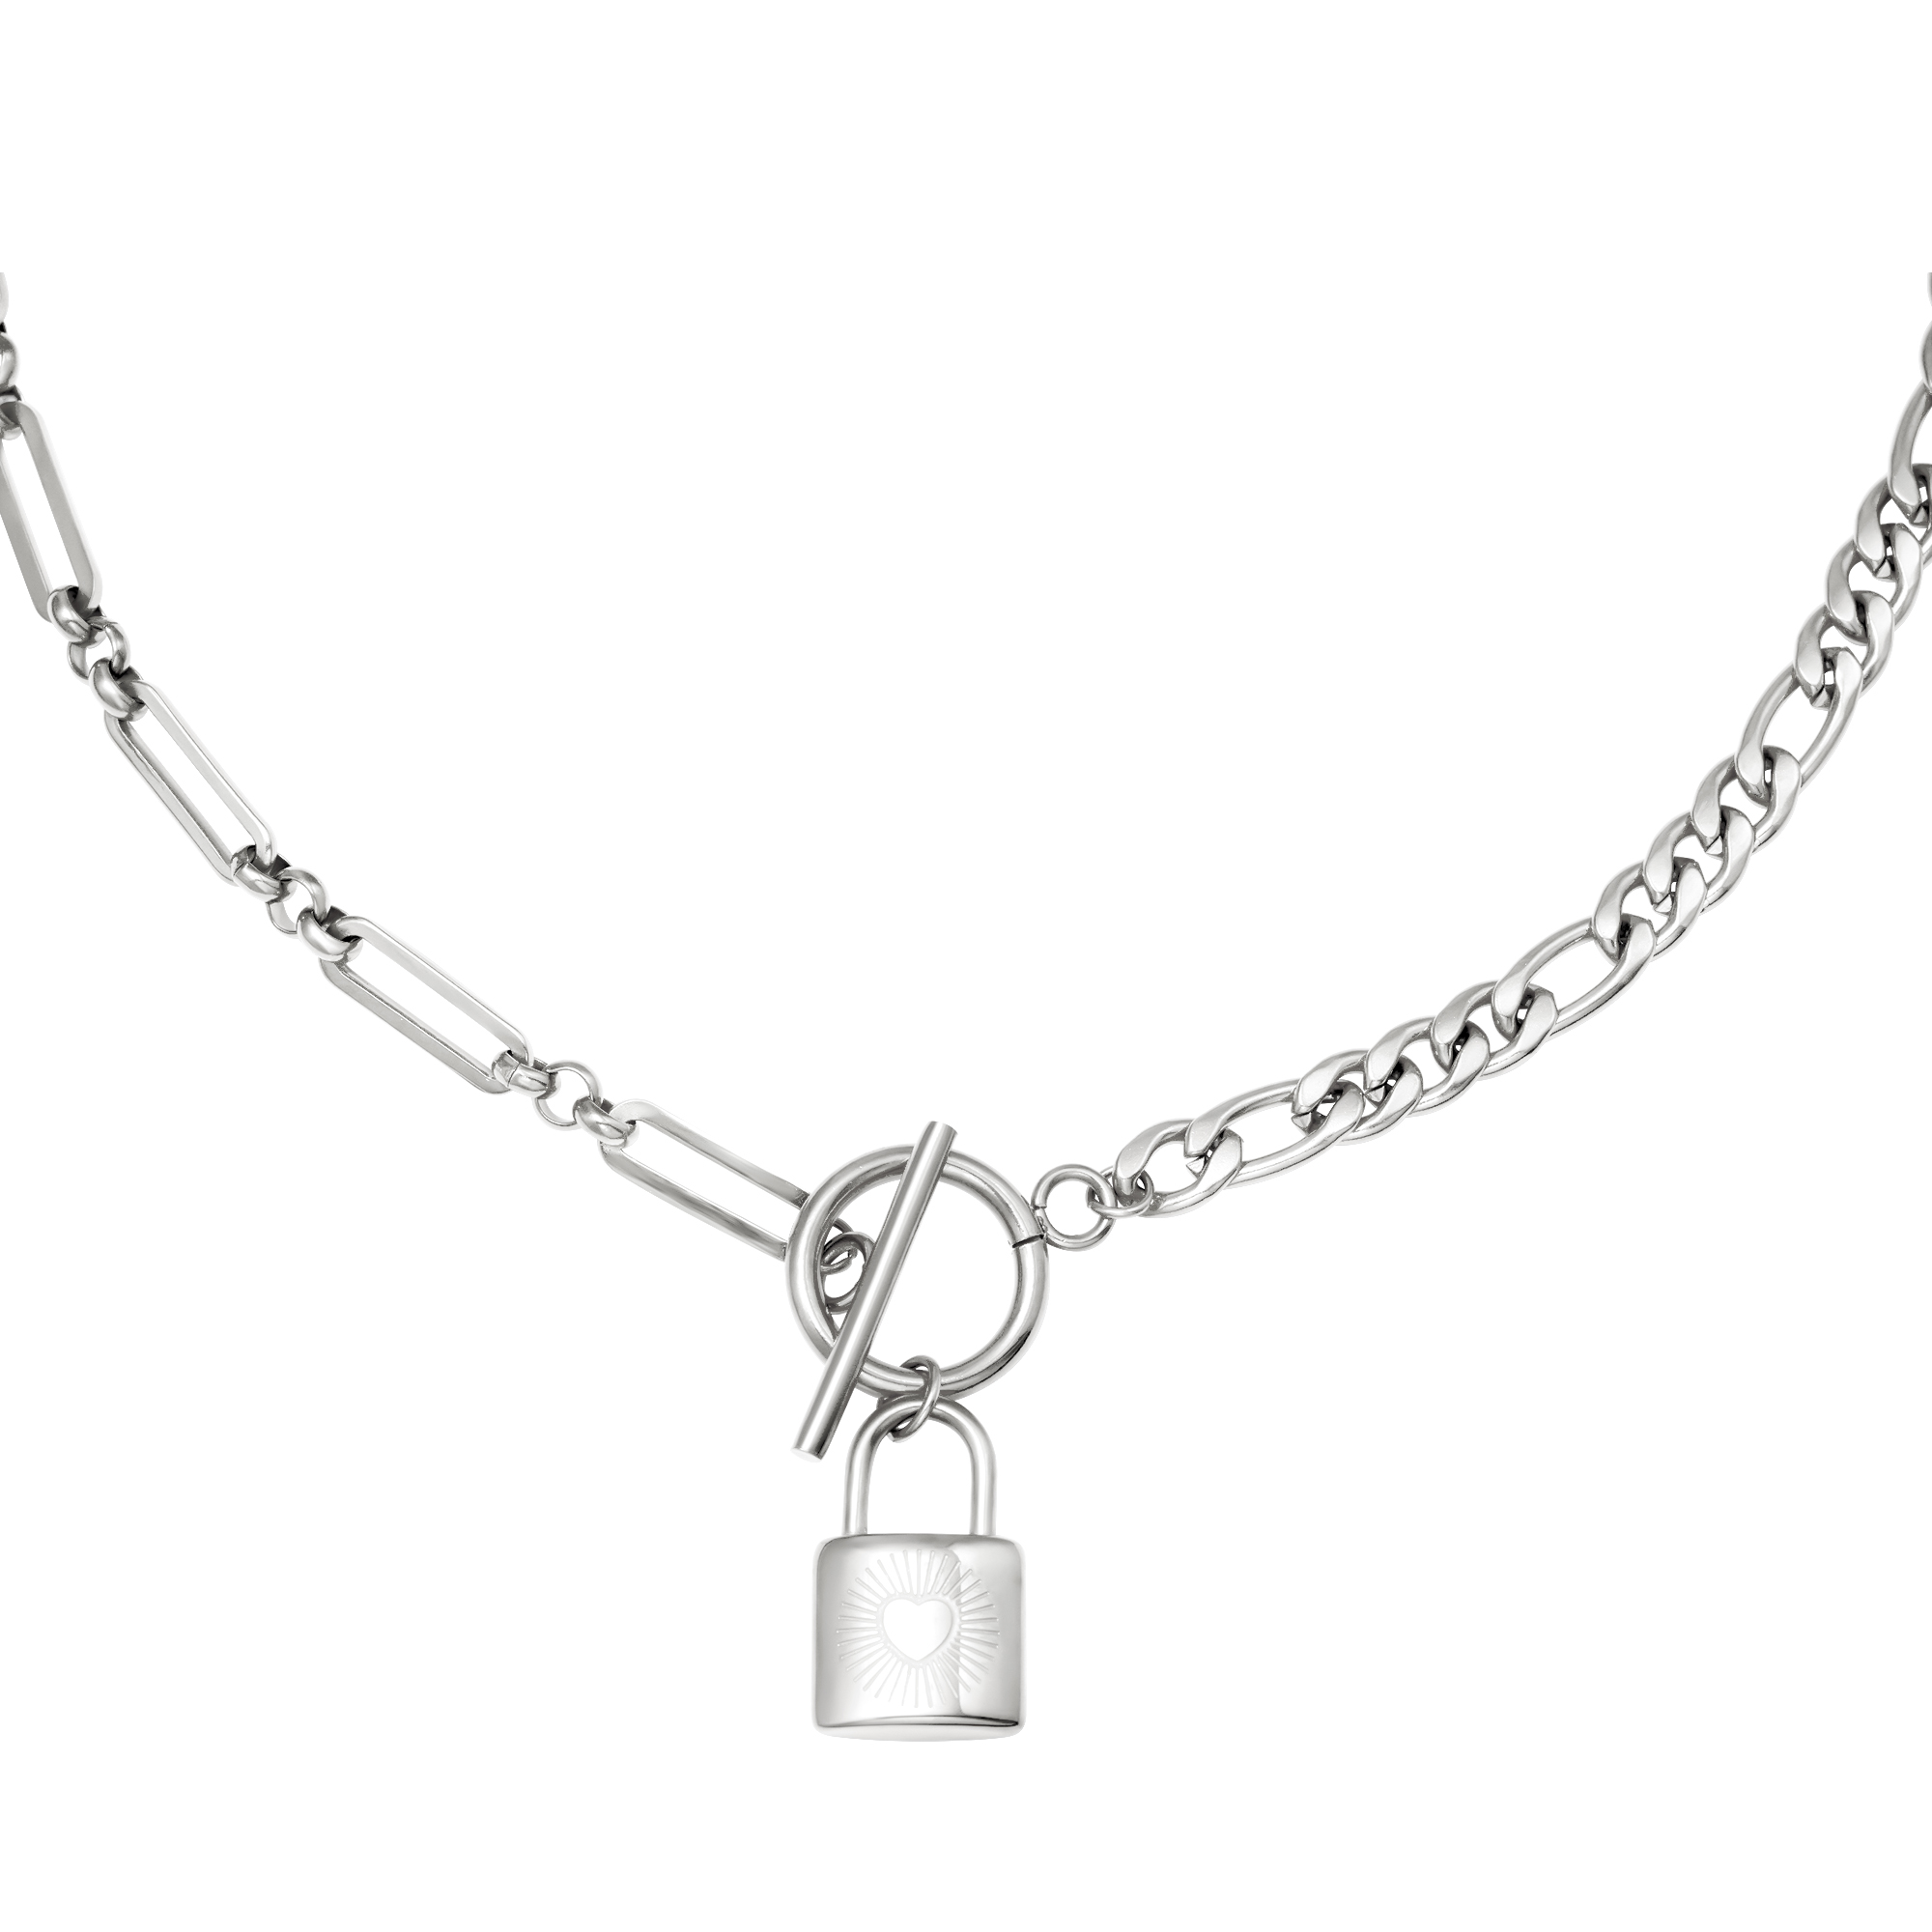 Necklace Chain & Lock h5 